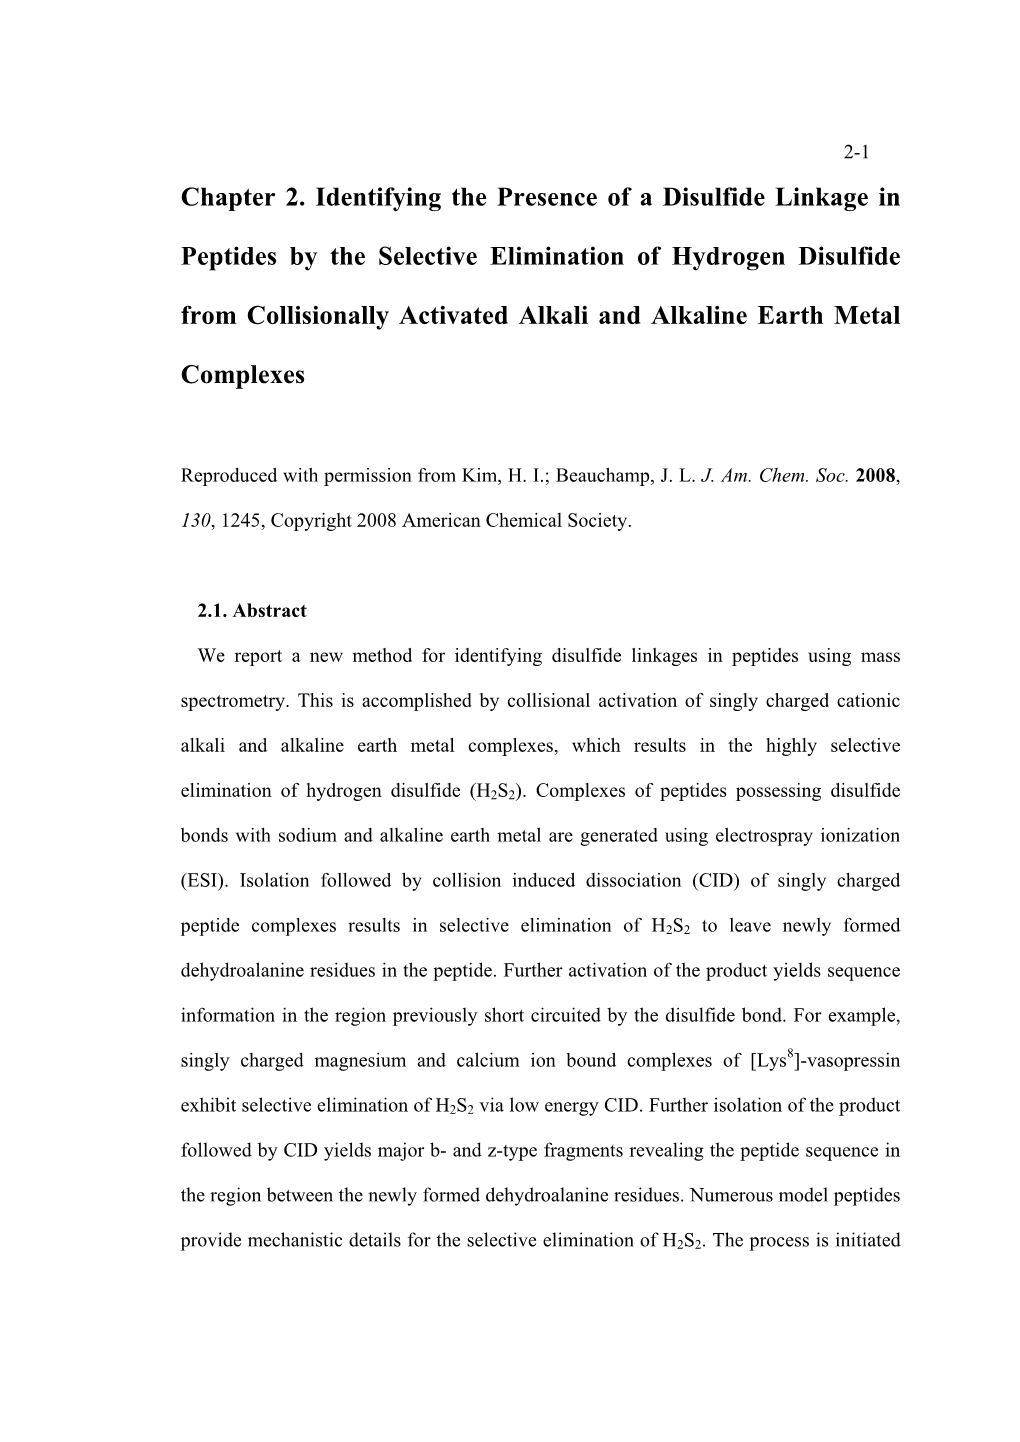 Chapter 2. Identifying the Presence of a Disulfide Linkage in Peptides by the Selective Elimination of Hydrogen Disulfide from C